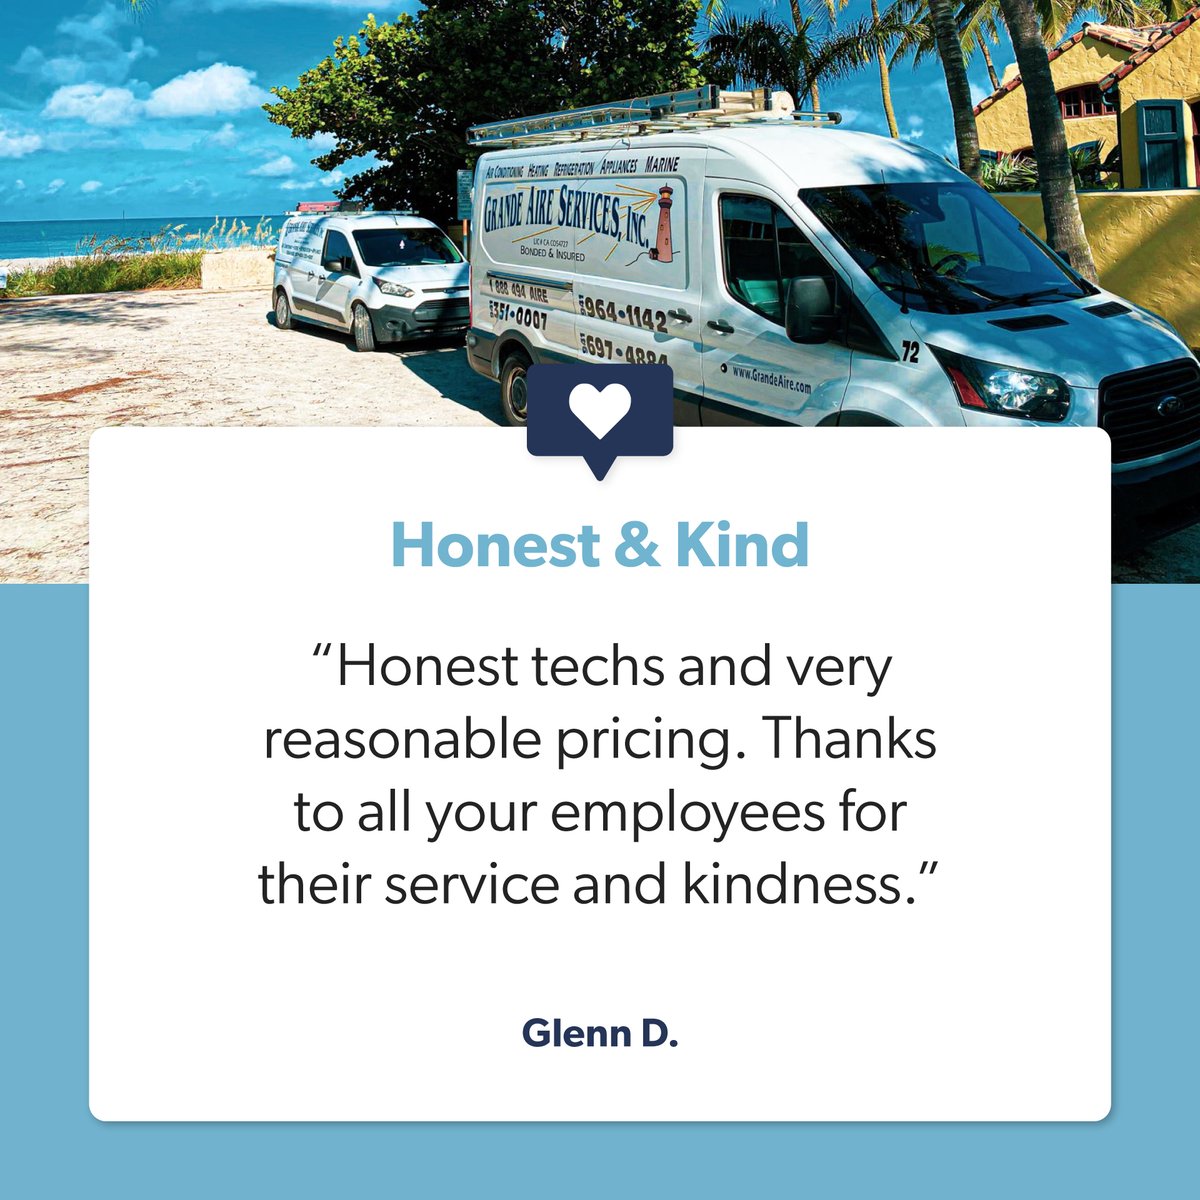 Excellent customer service is our top priority! Thank you for choosing Grande Aire for your air conditioner repair, Glenn 🤝 We appreciate the 5-star review! #FiveStarFriday #GrandeAire